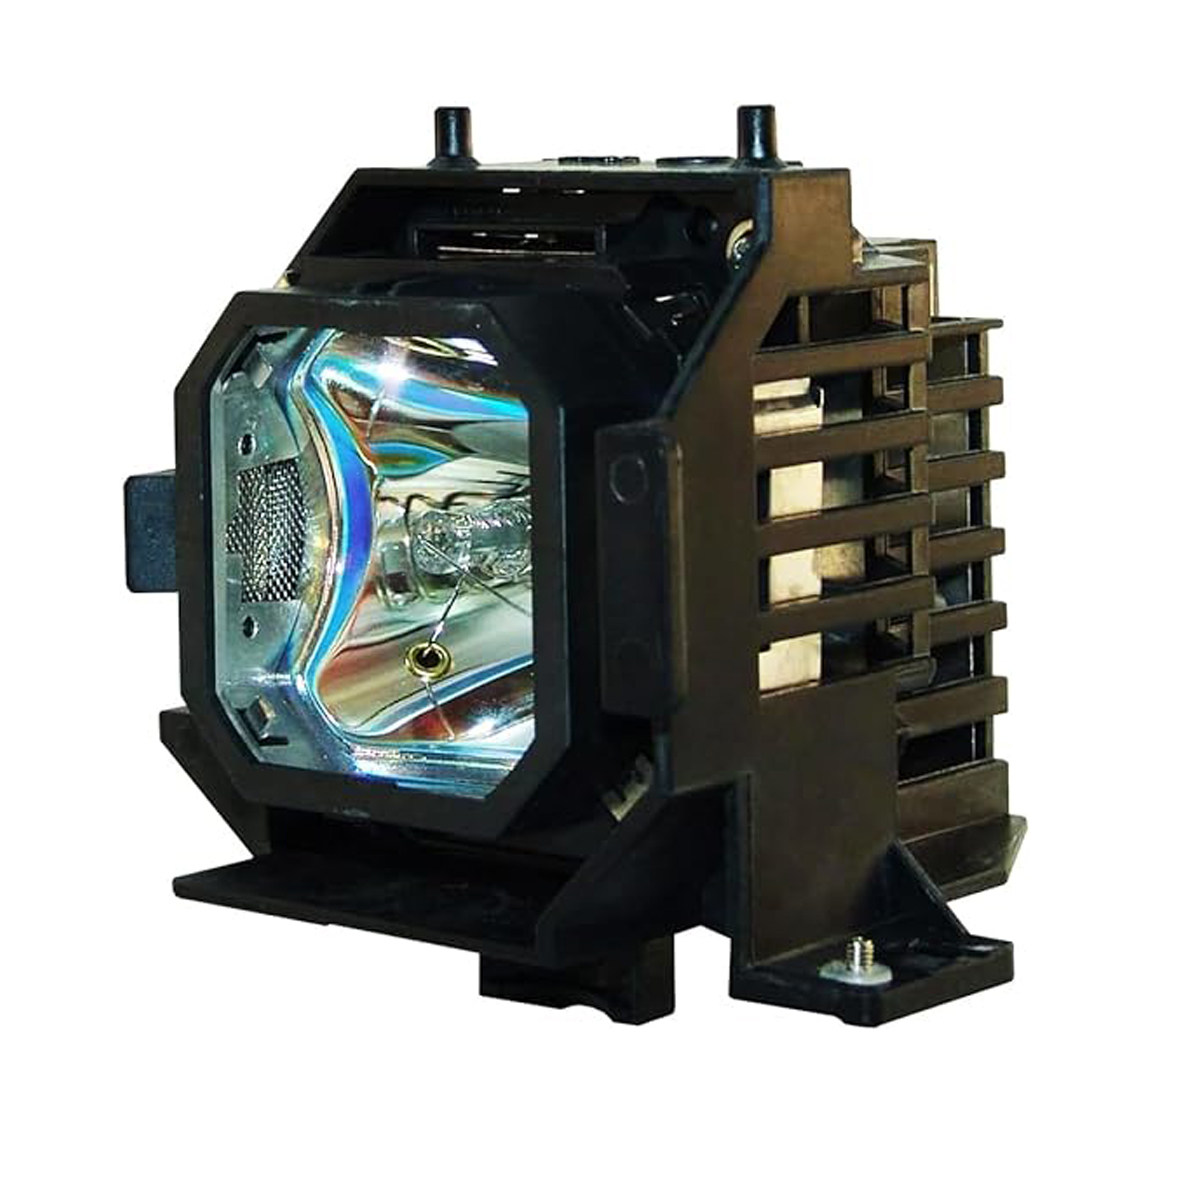 Replacement Projector lamp ELPLP31 For Epson EMP -830 EMP -835 EMP-835p